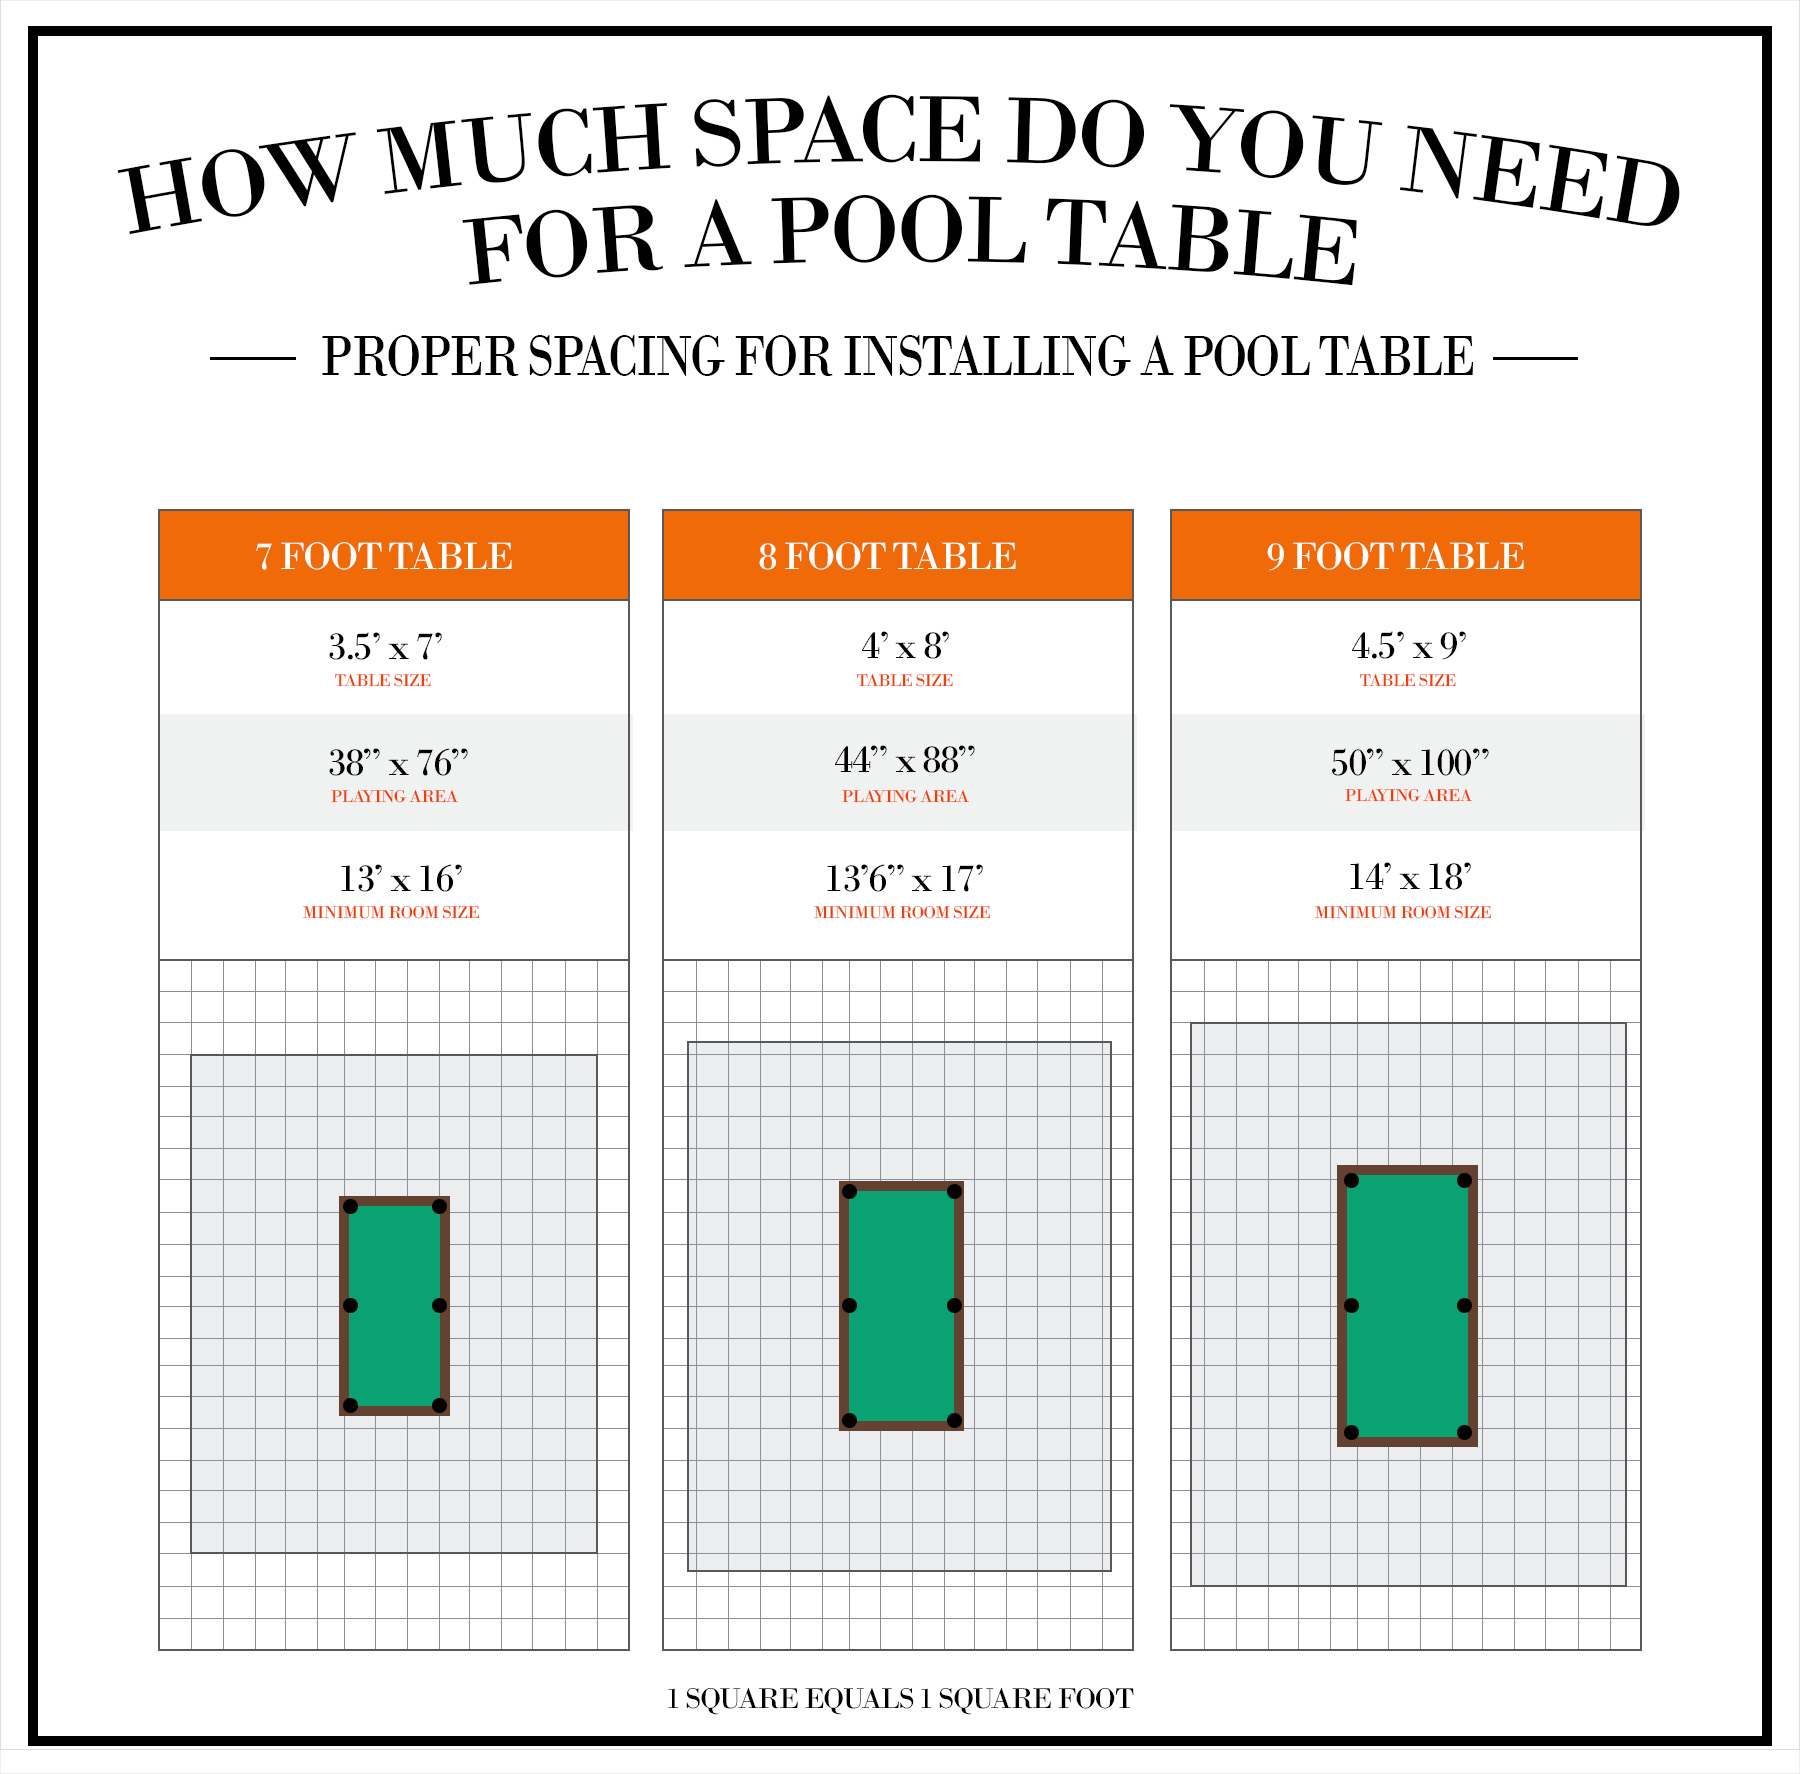 how much space do you need for a pool table infographic 1